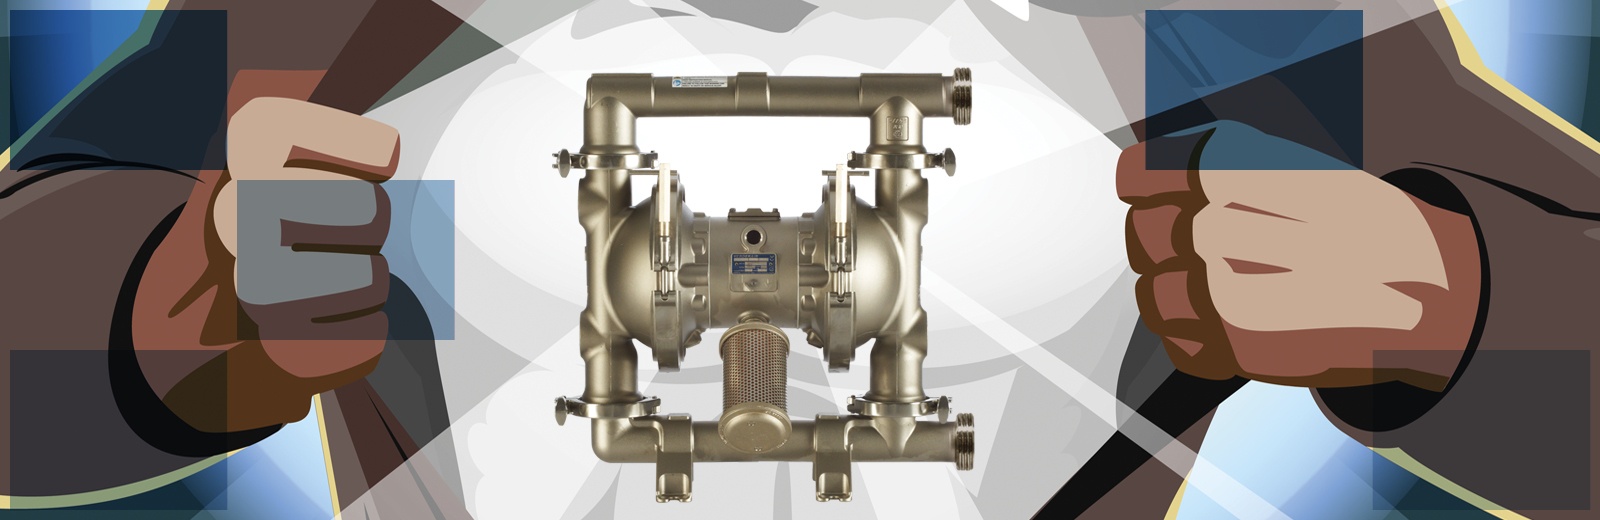 Diaphragm Pumps: The Workhorse For All Applications